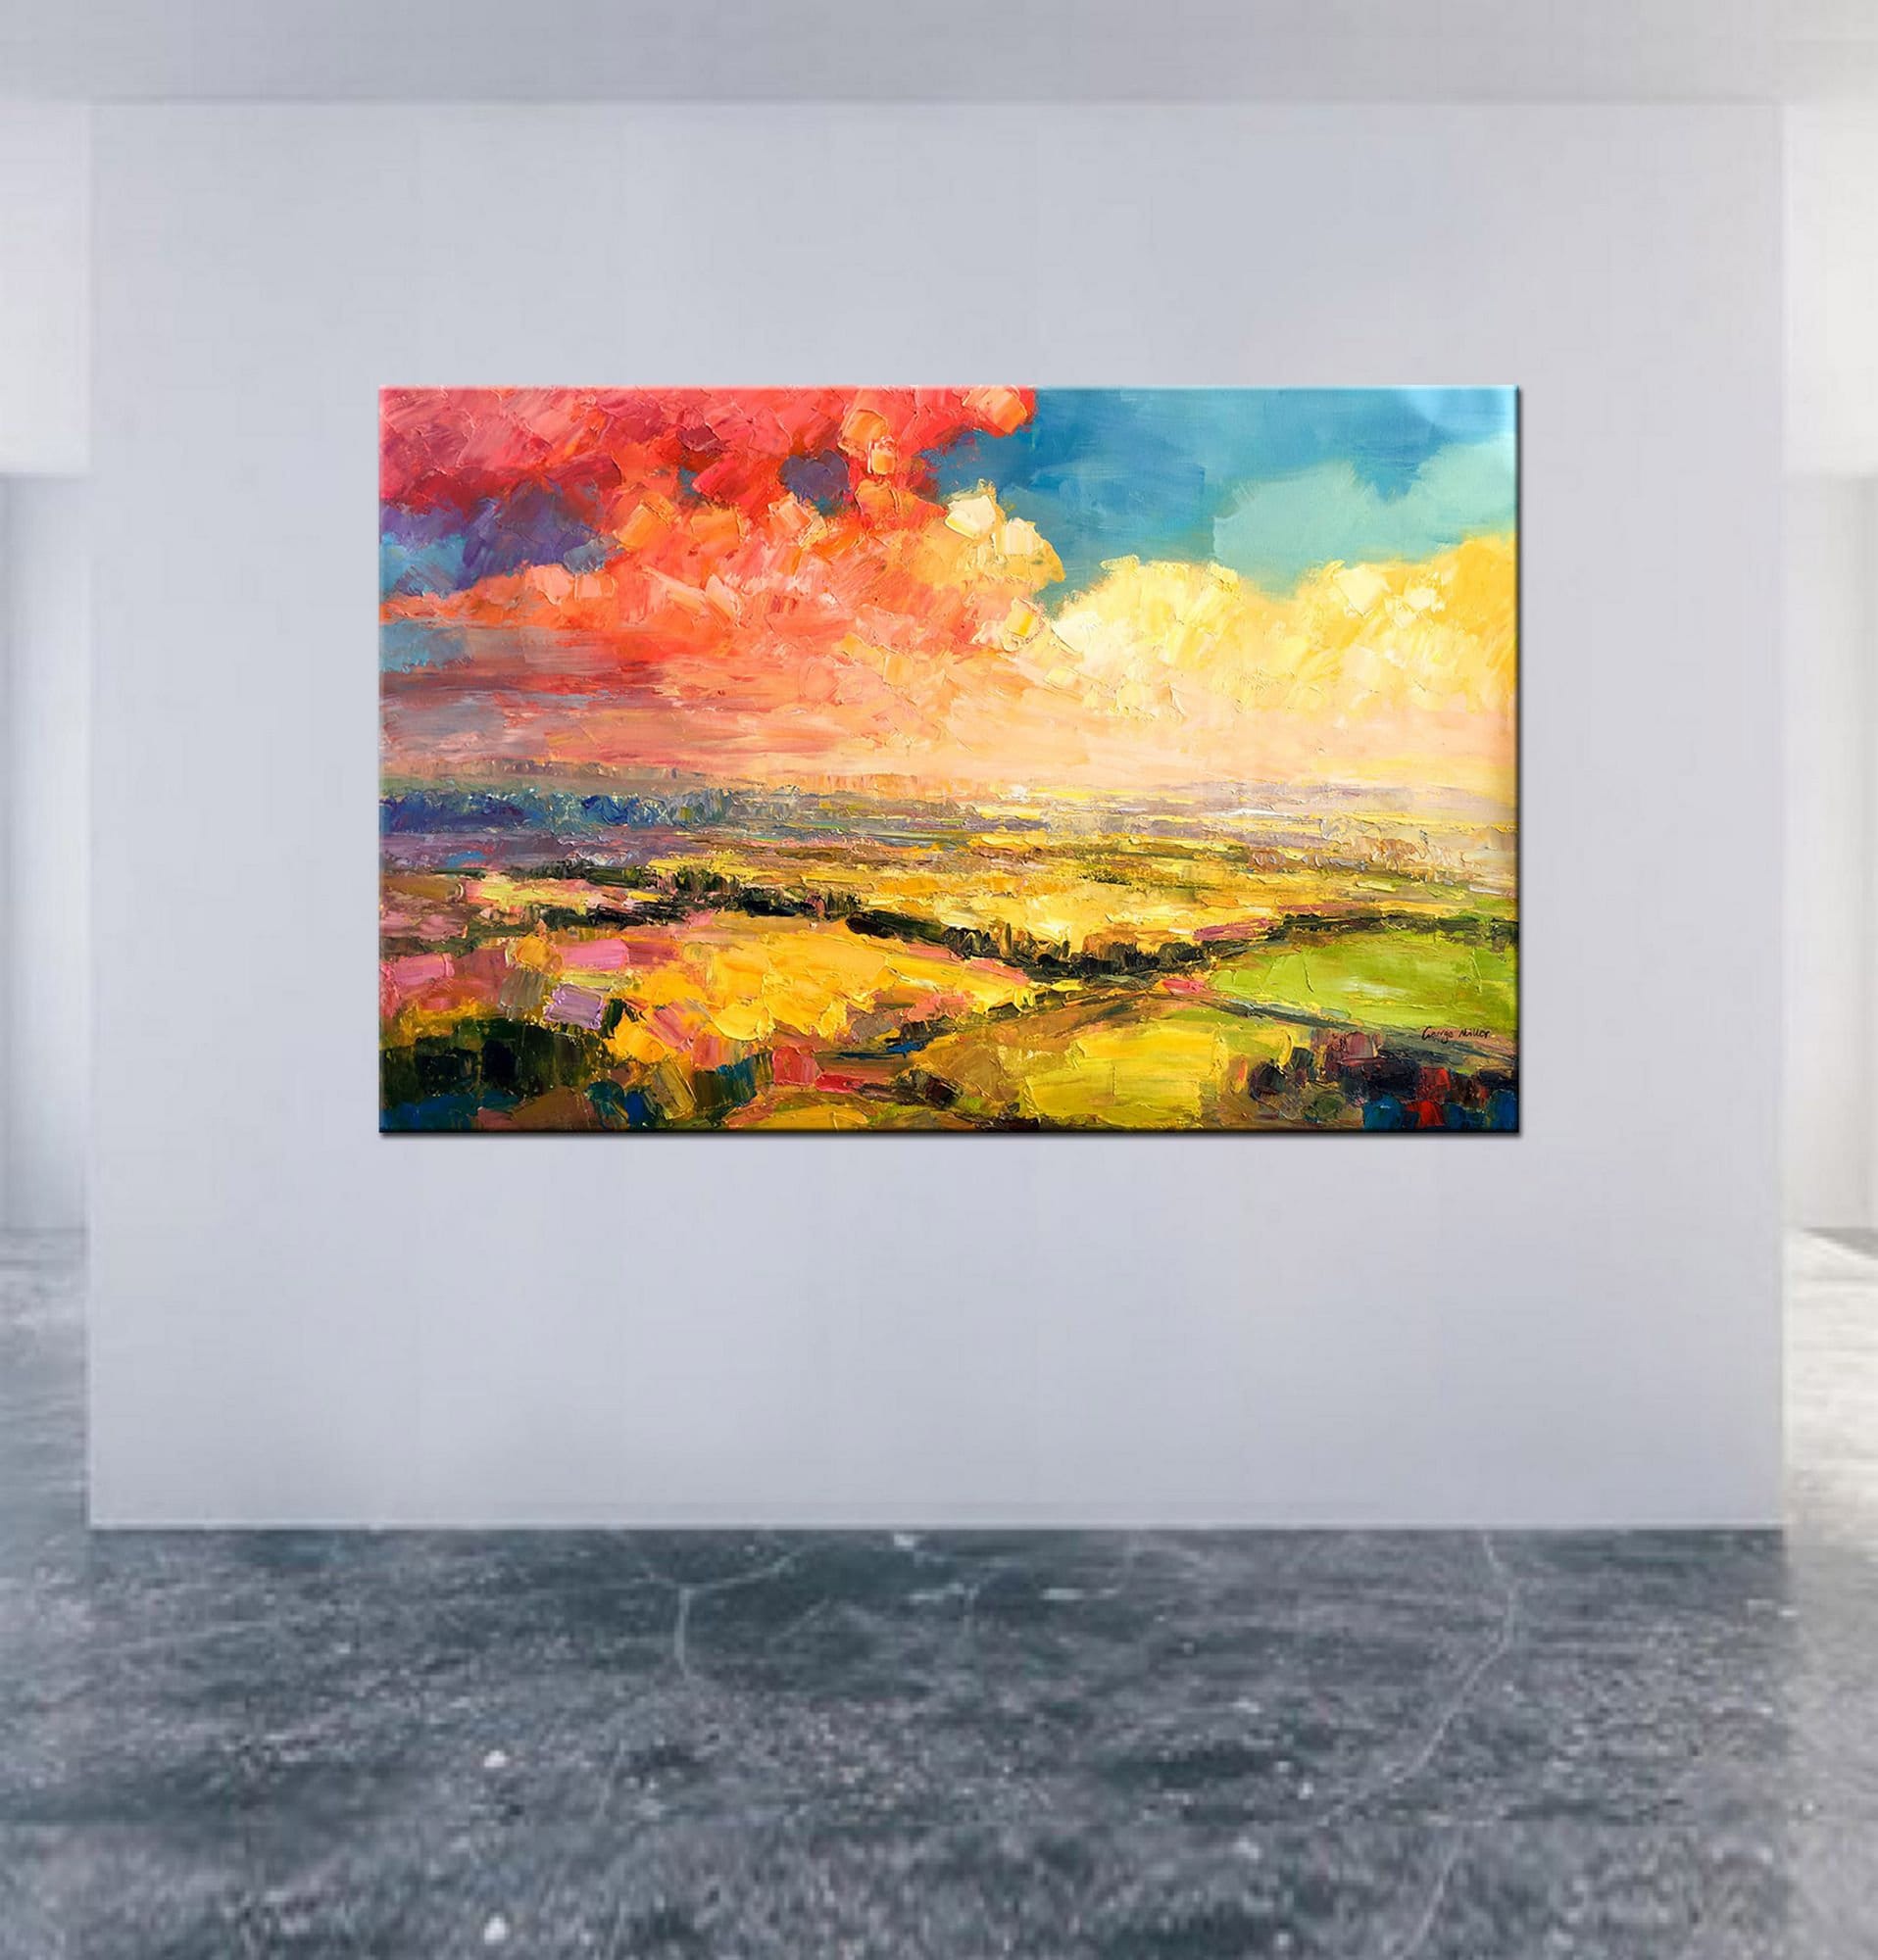 Large Art, Landscape Oil Painting Wall Hanging, Original Landscape Painting, Abstract Canvas Painting, Modern Abstract Landscape Painting